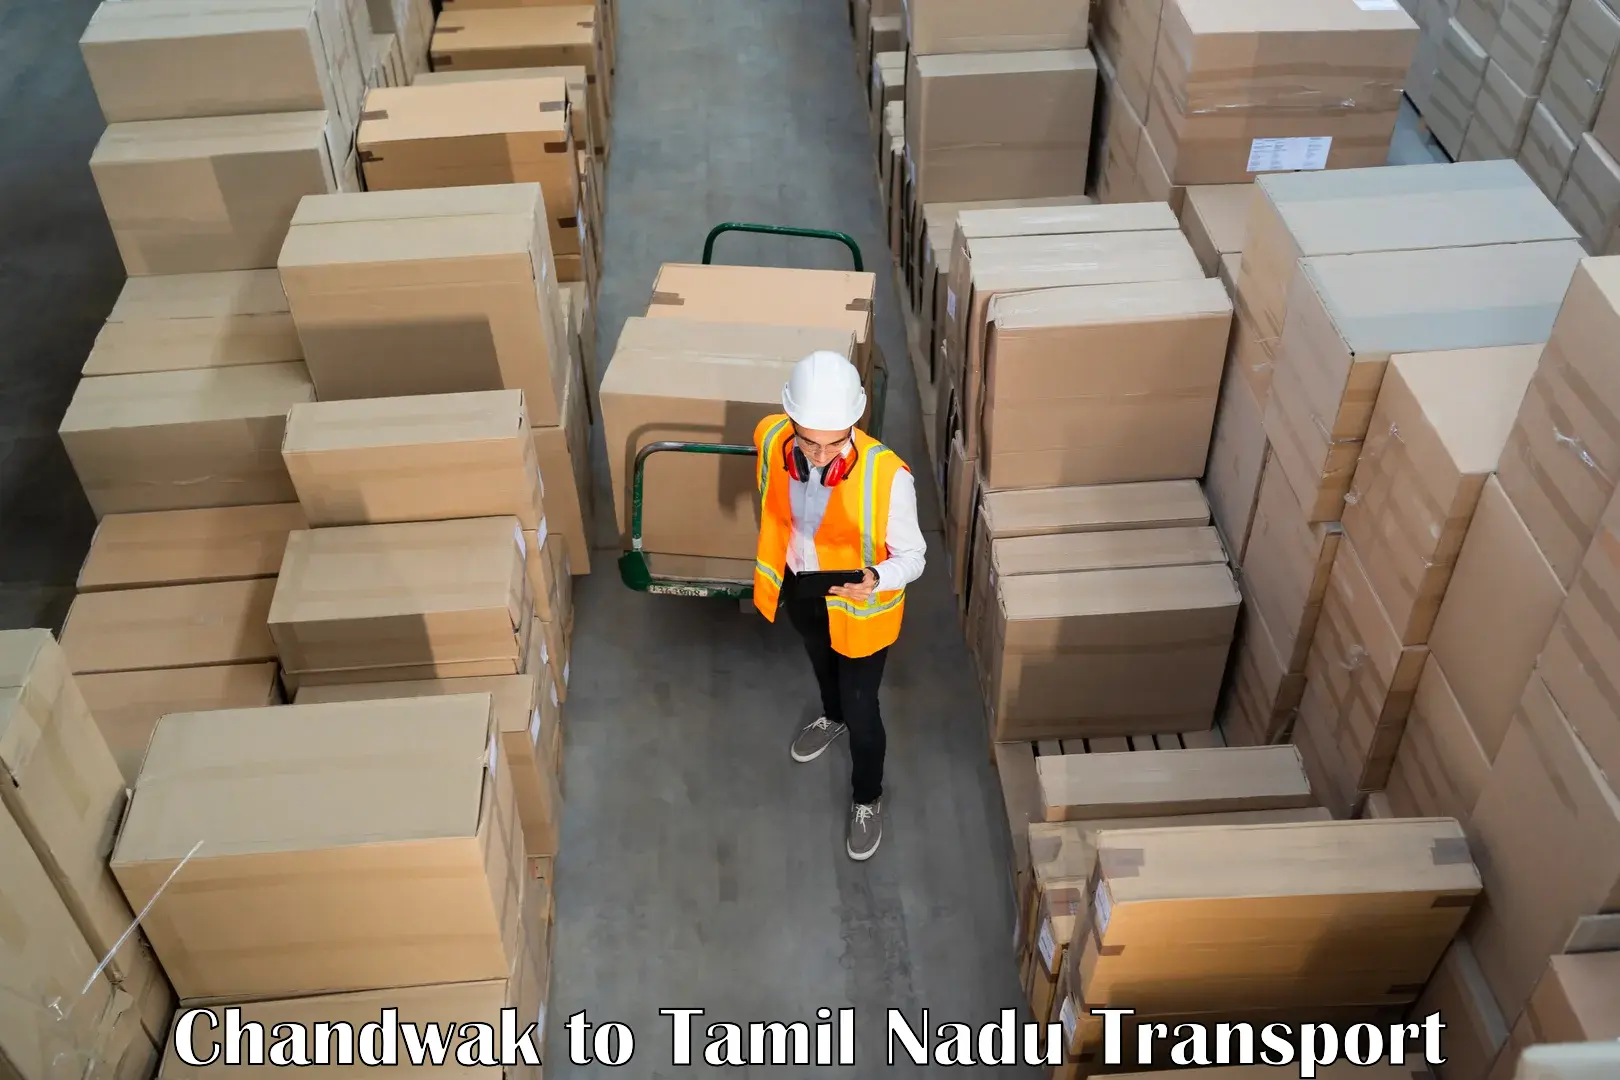 Part load transport service in India Chandwak to Chennai Port